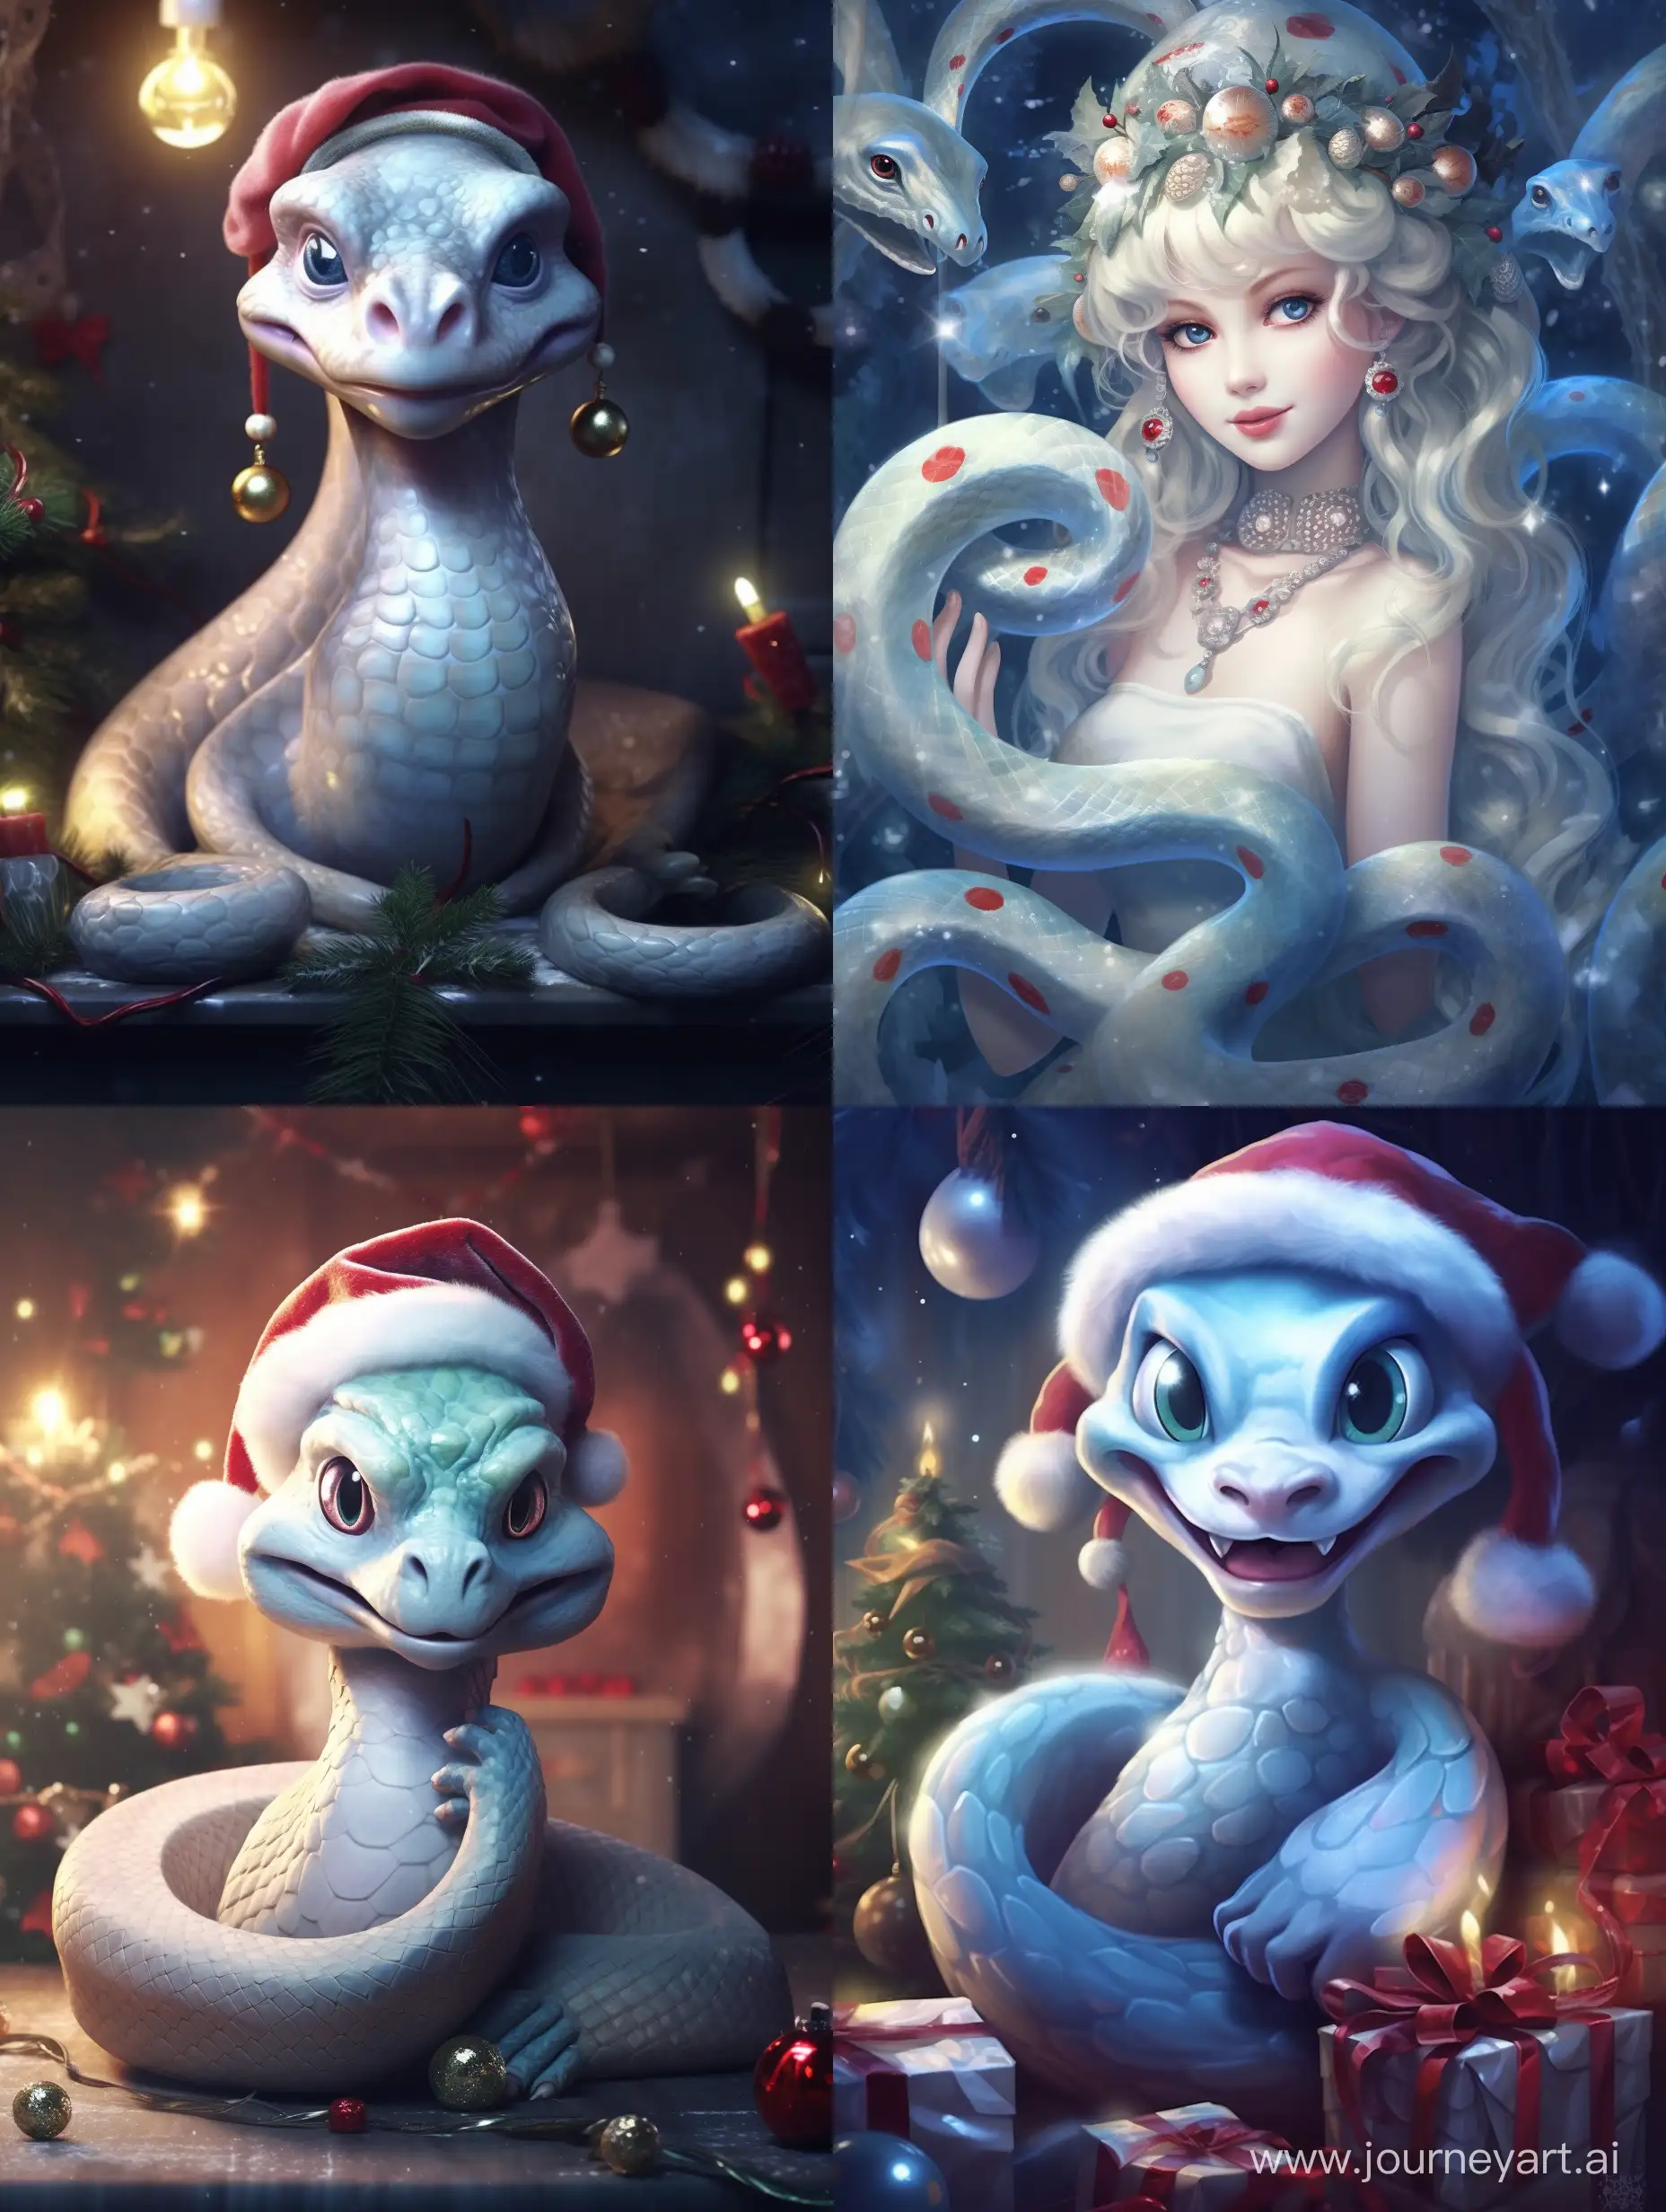 Whimsical-PixarStyle-Snake-Wearing-Santa-Hat-Amid-New-Years-Decorations